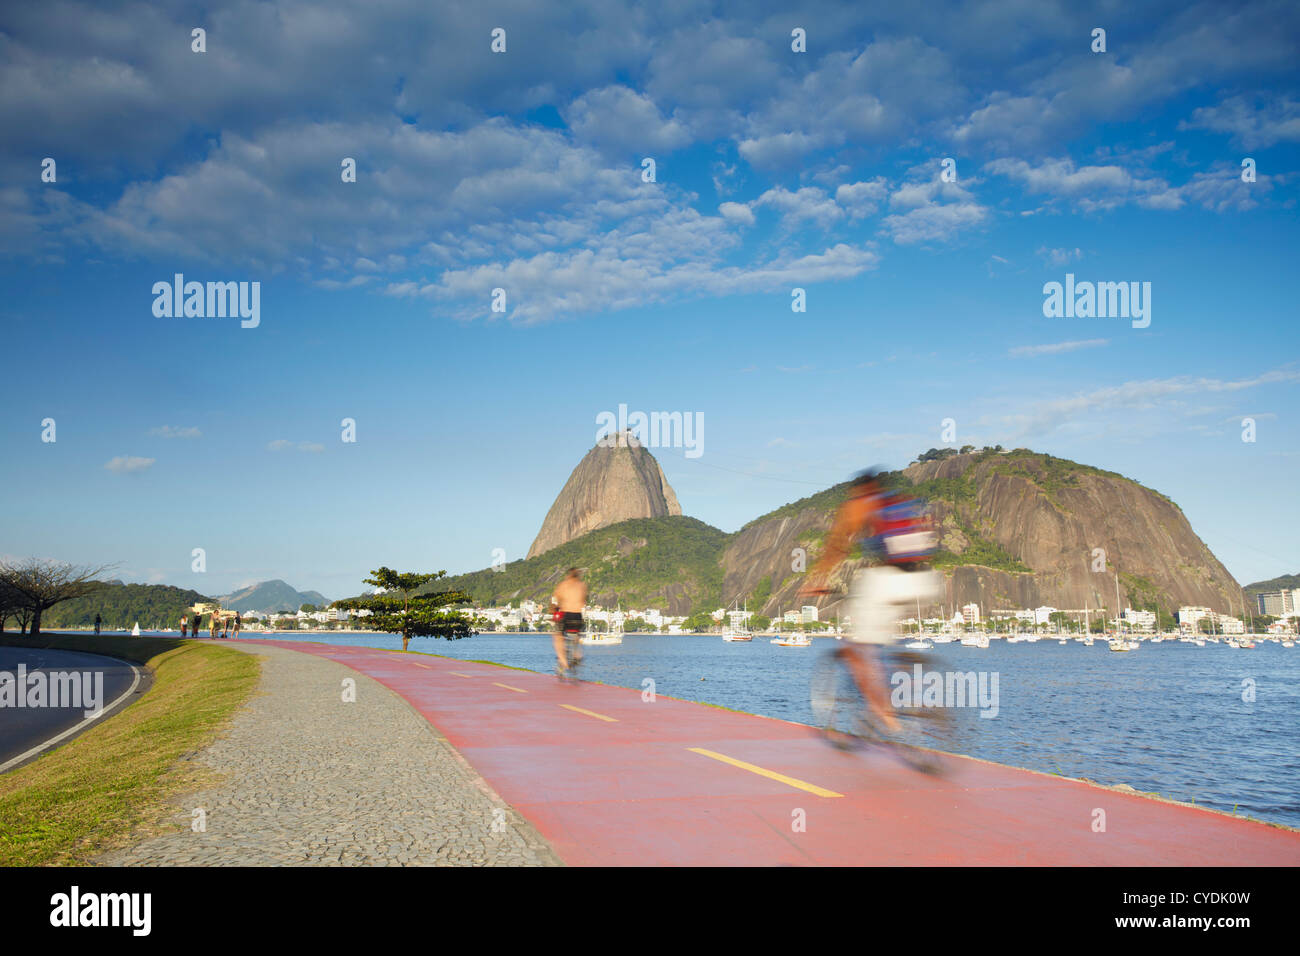 Cyclists on pathway around Botafogo Bay with Sugar Loaf Mountain (Pao de Acucar) in the background, Rio de Janeiro, Brazil Stock Photo